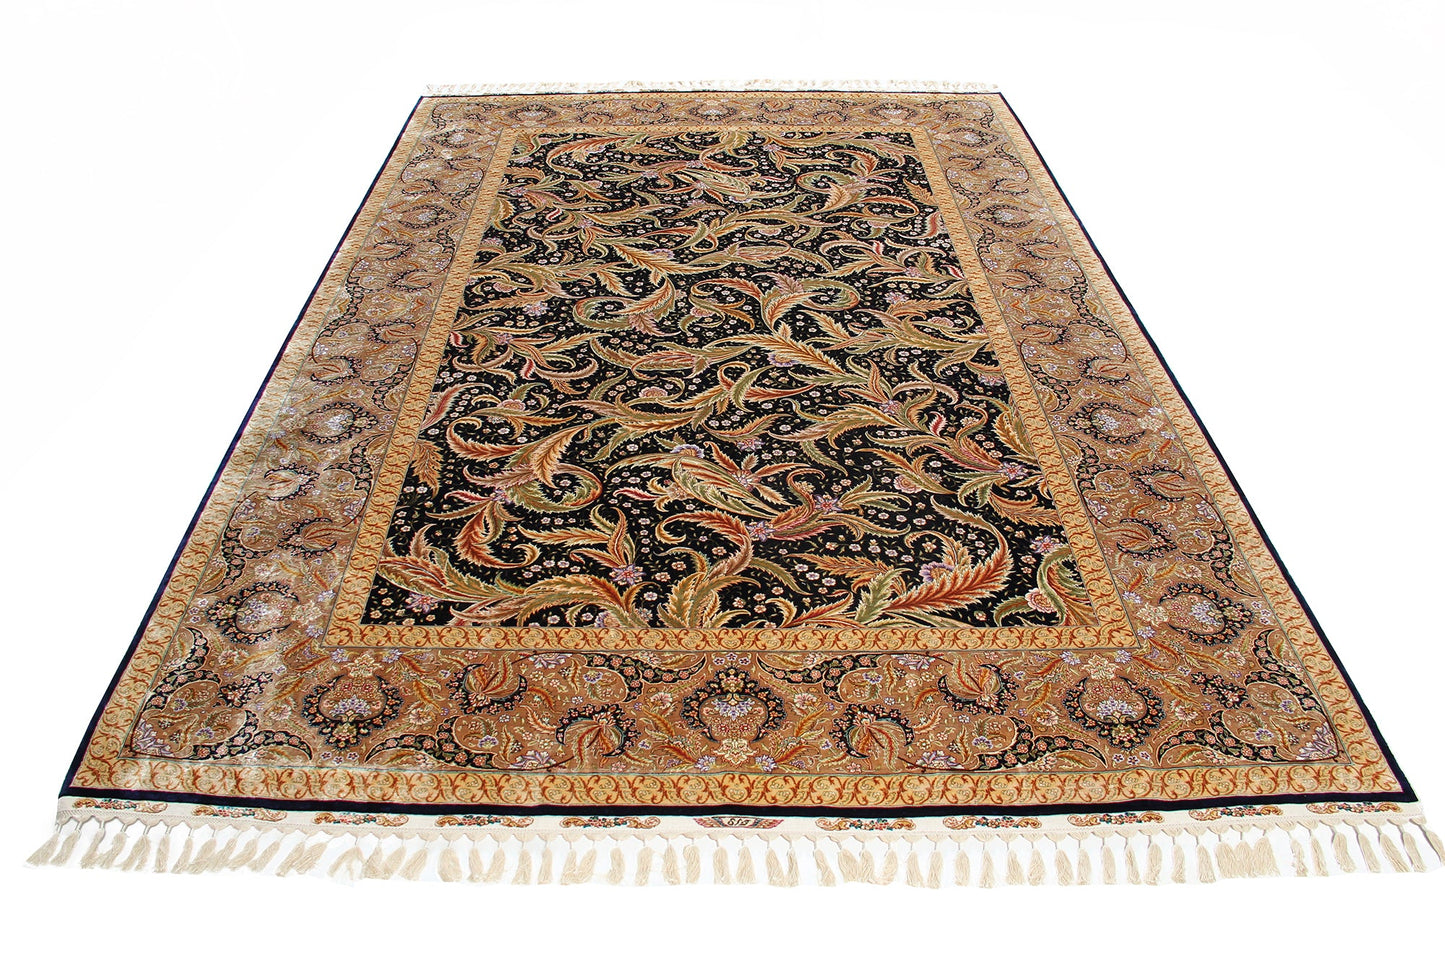 China Traditional Floral Silk Rug With Turkish Pattern And  China  Design product image #27556092969130